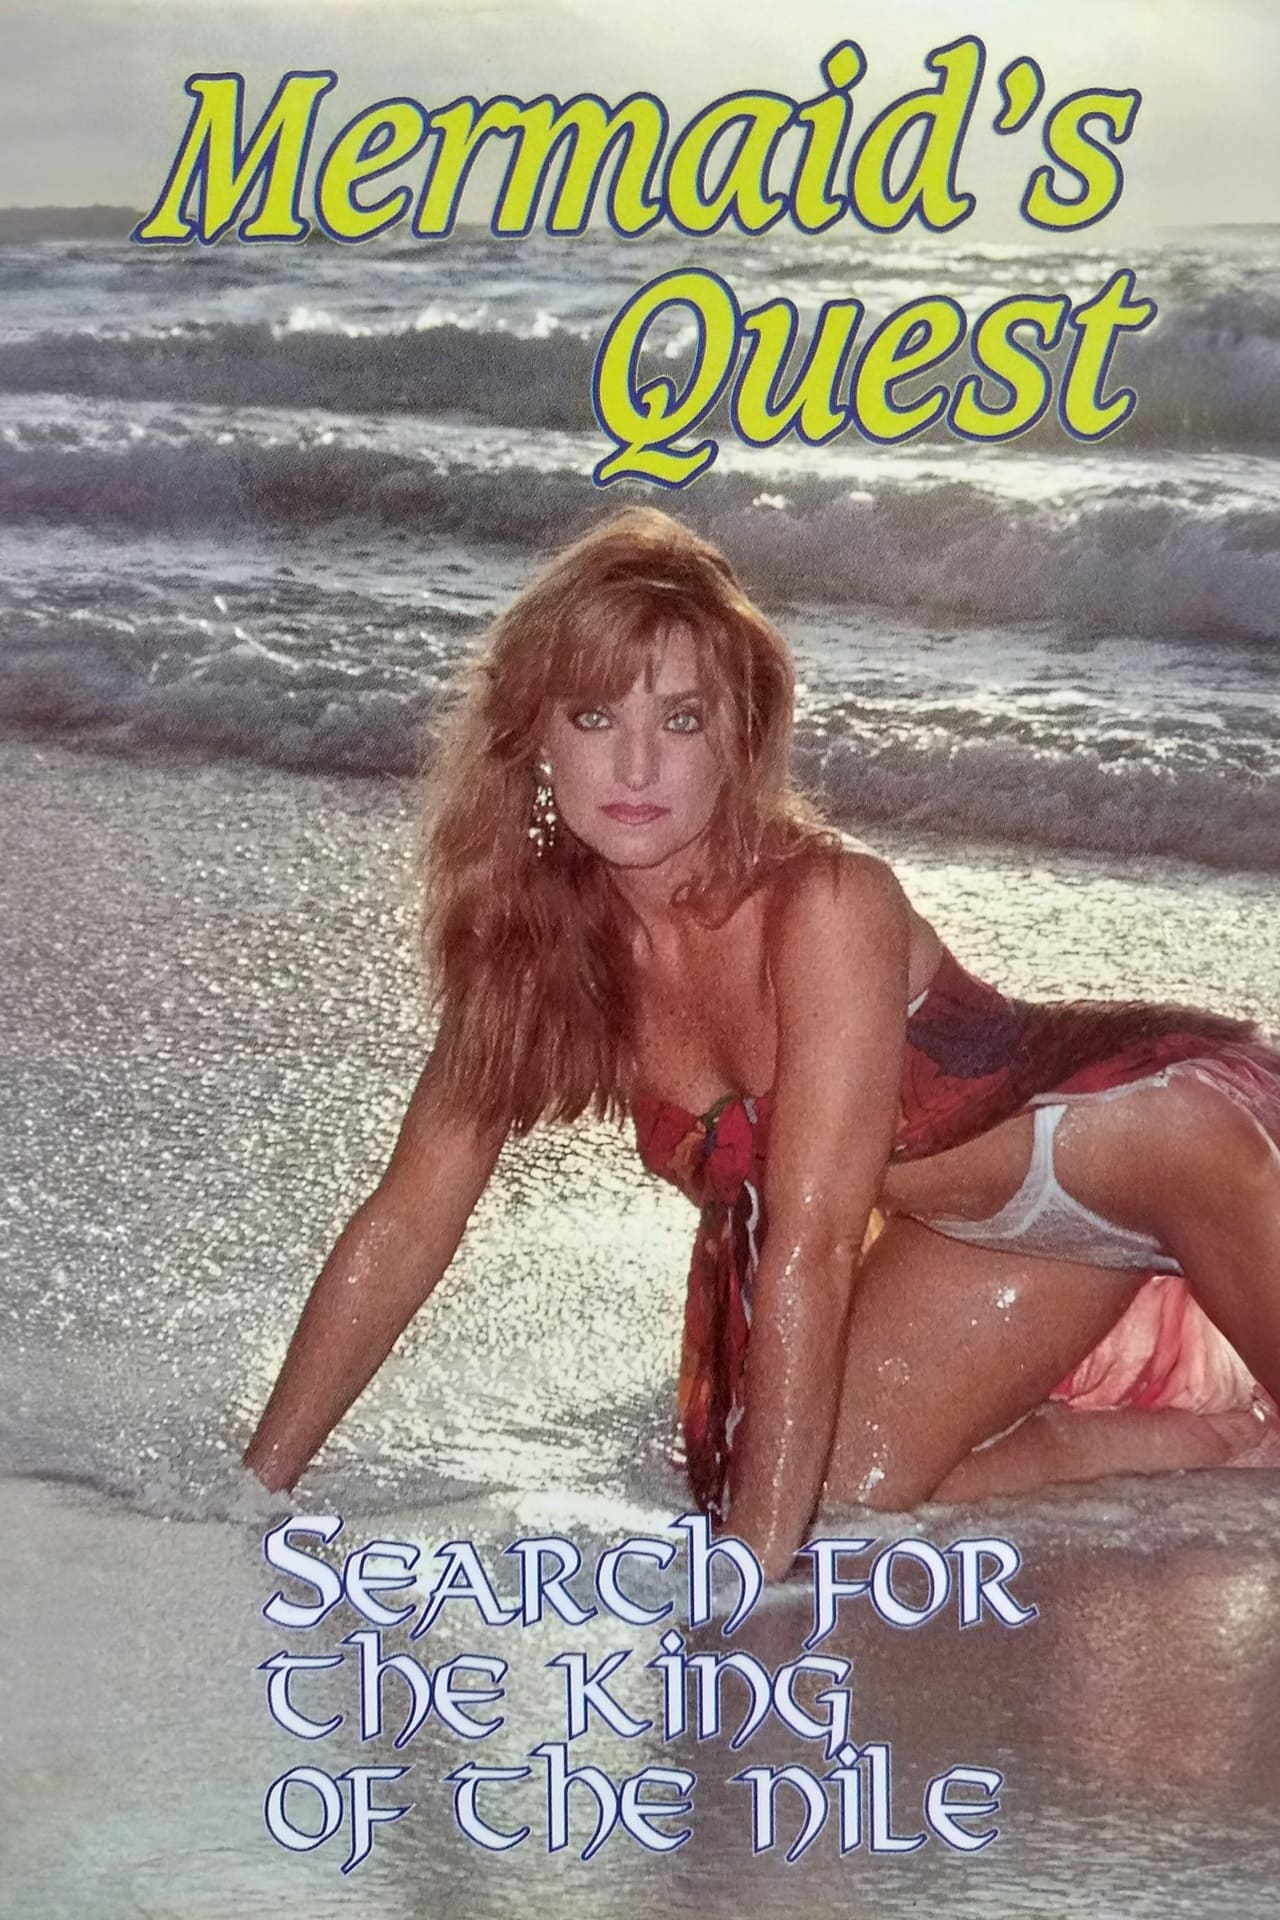 Mermaid's Quest: Search For the King of the Nile